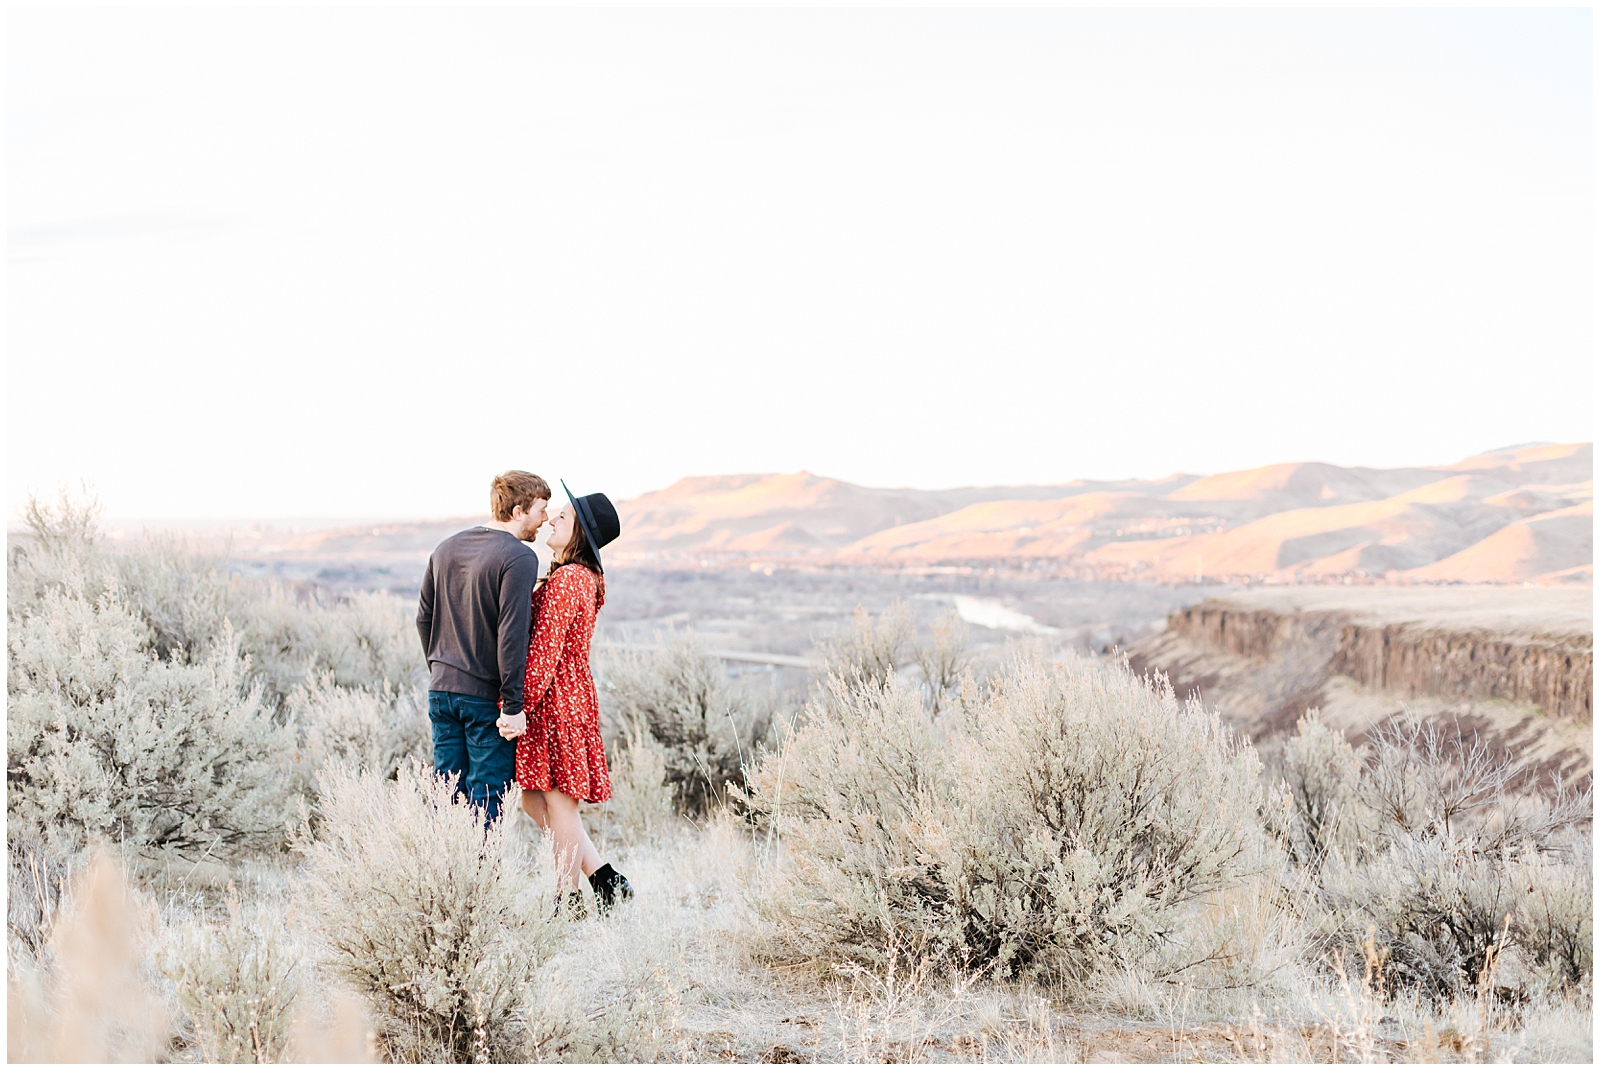 Boise Foothills Desert Engagement Session by Karli and David Photography